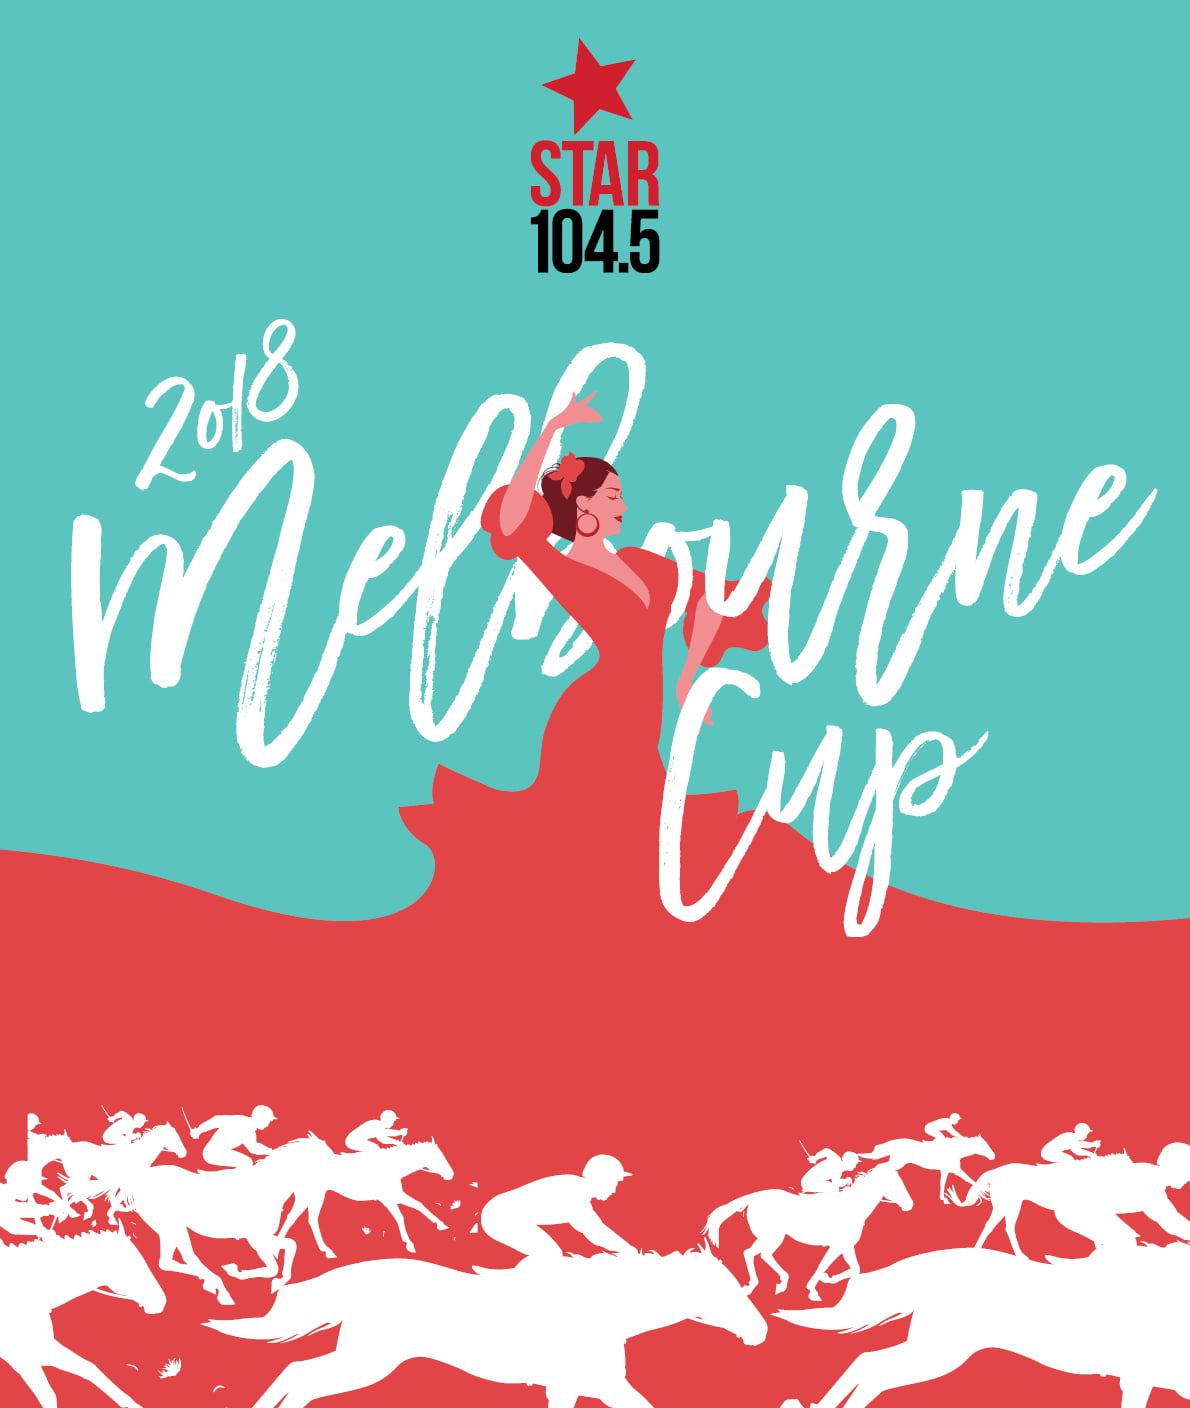 Star 104.5 Melbourne Cup Picnic Raceday